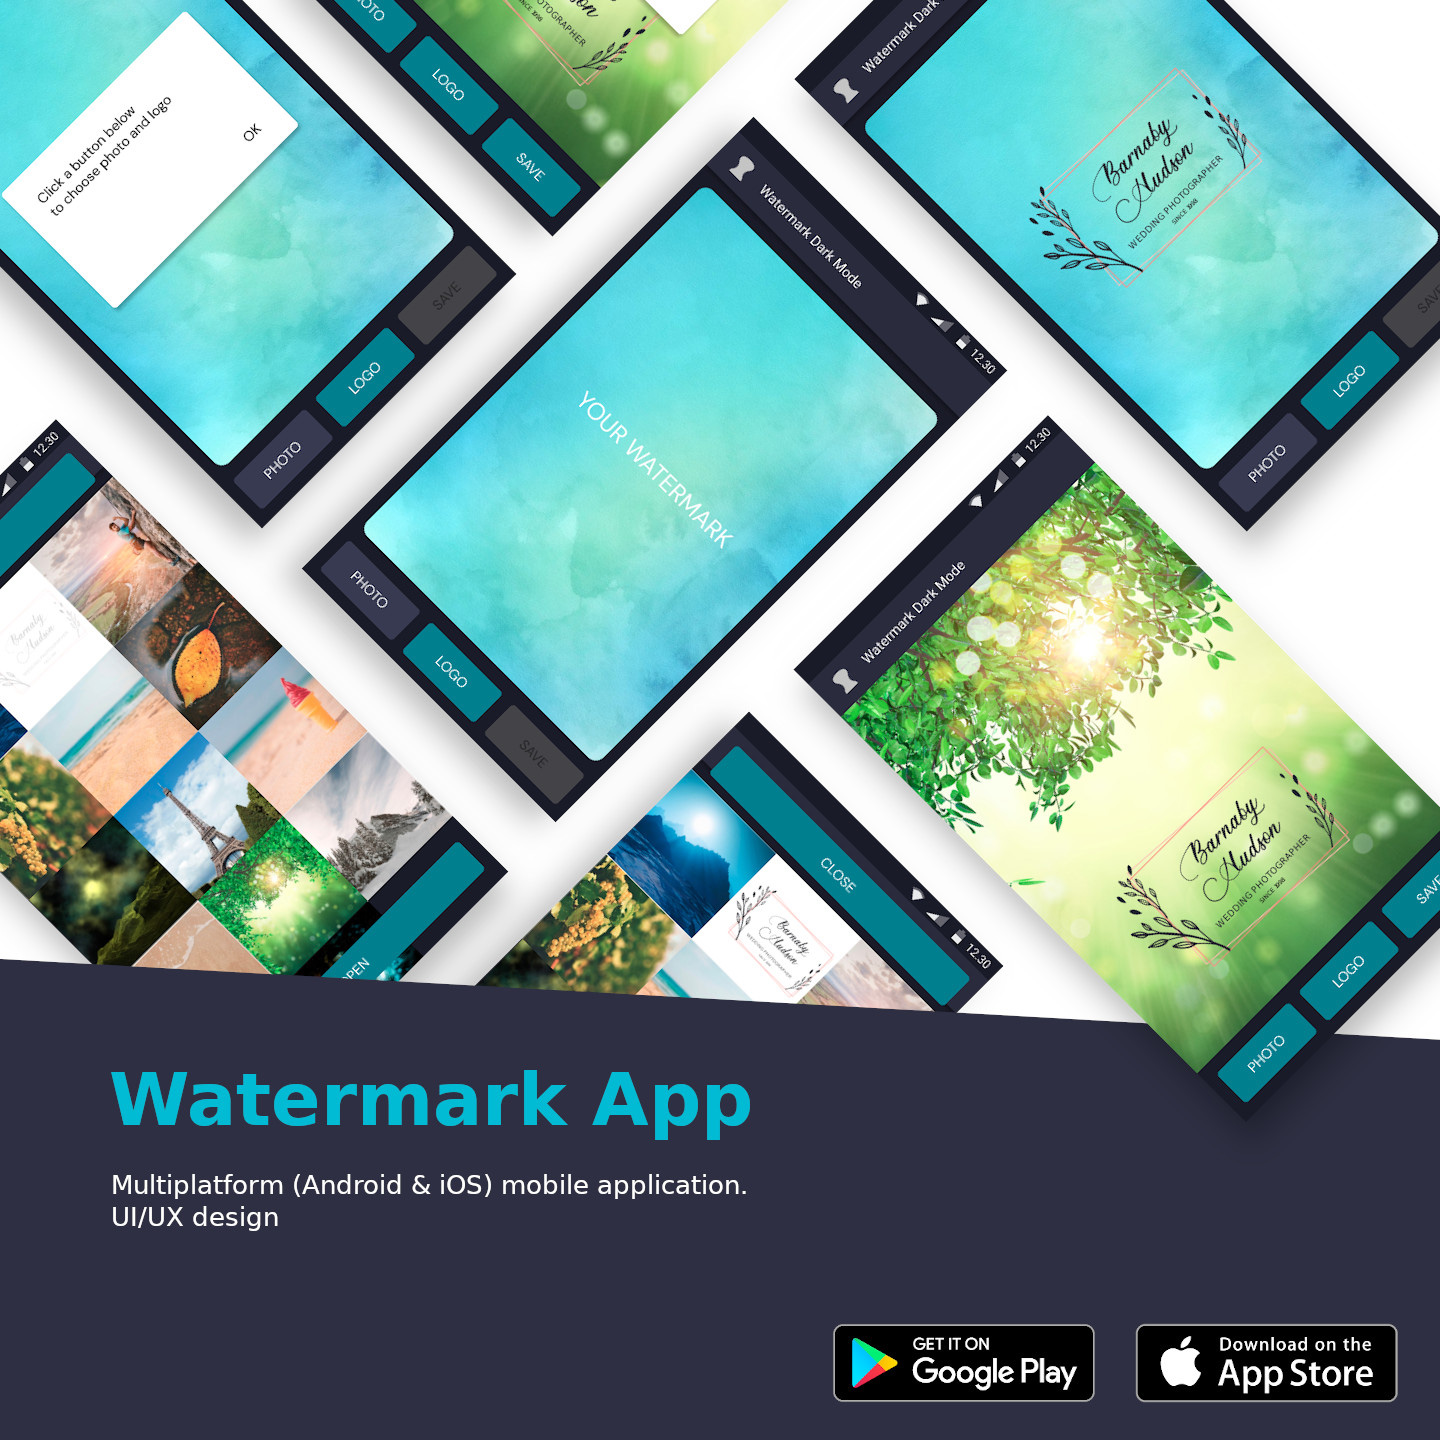 Watermark mobile application on React Native